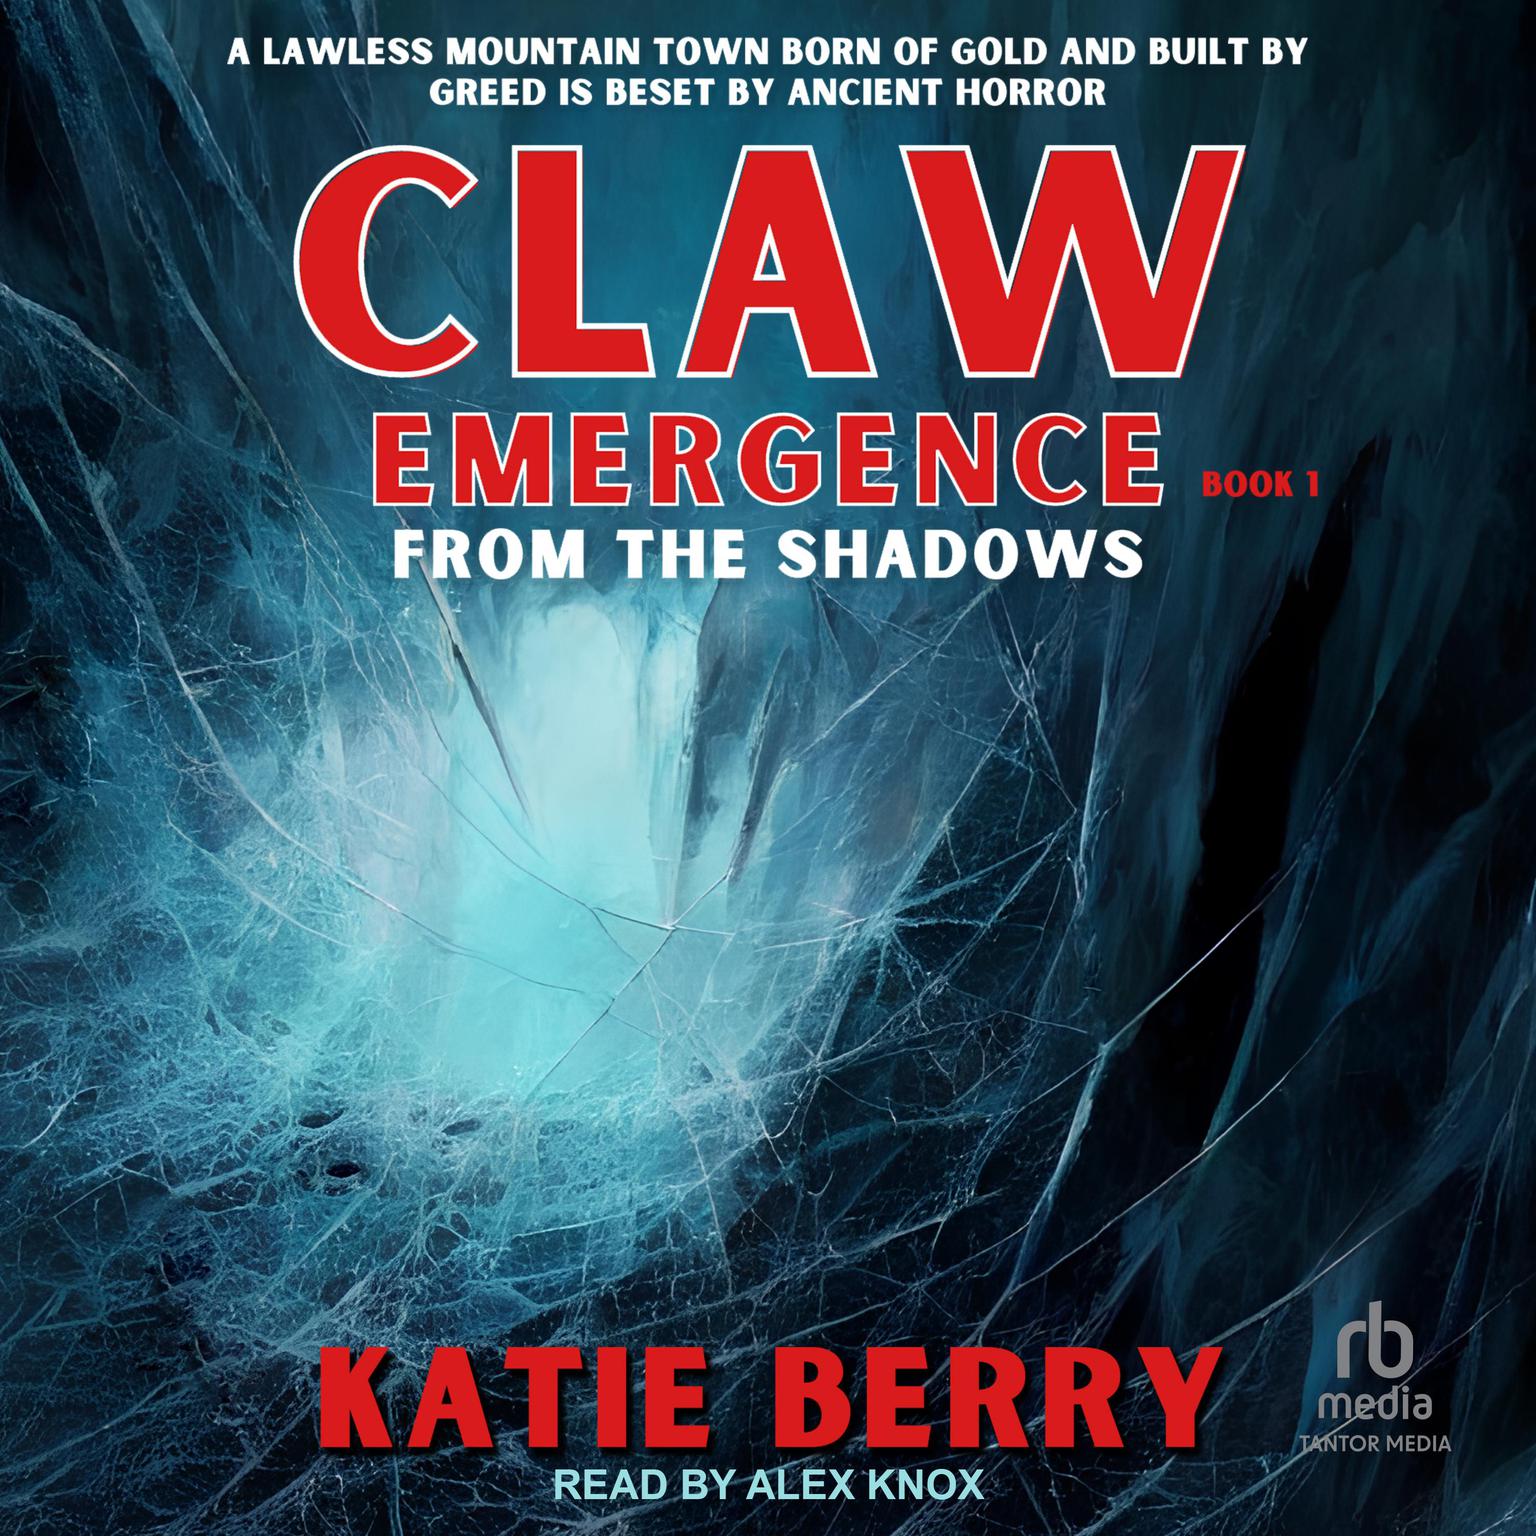 CLAW Emergence: From the Shadows Audiobook, by Katie Berry